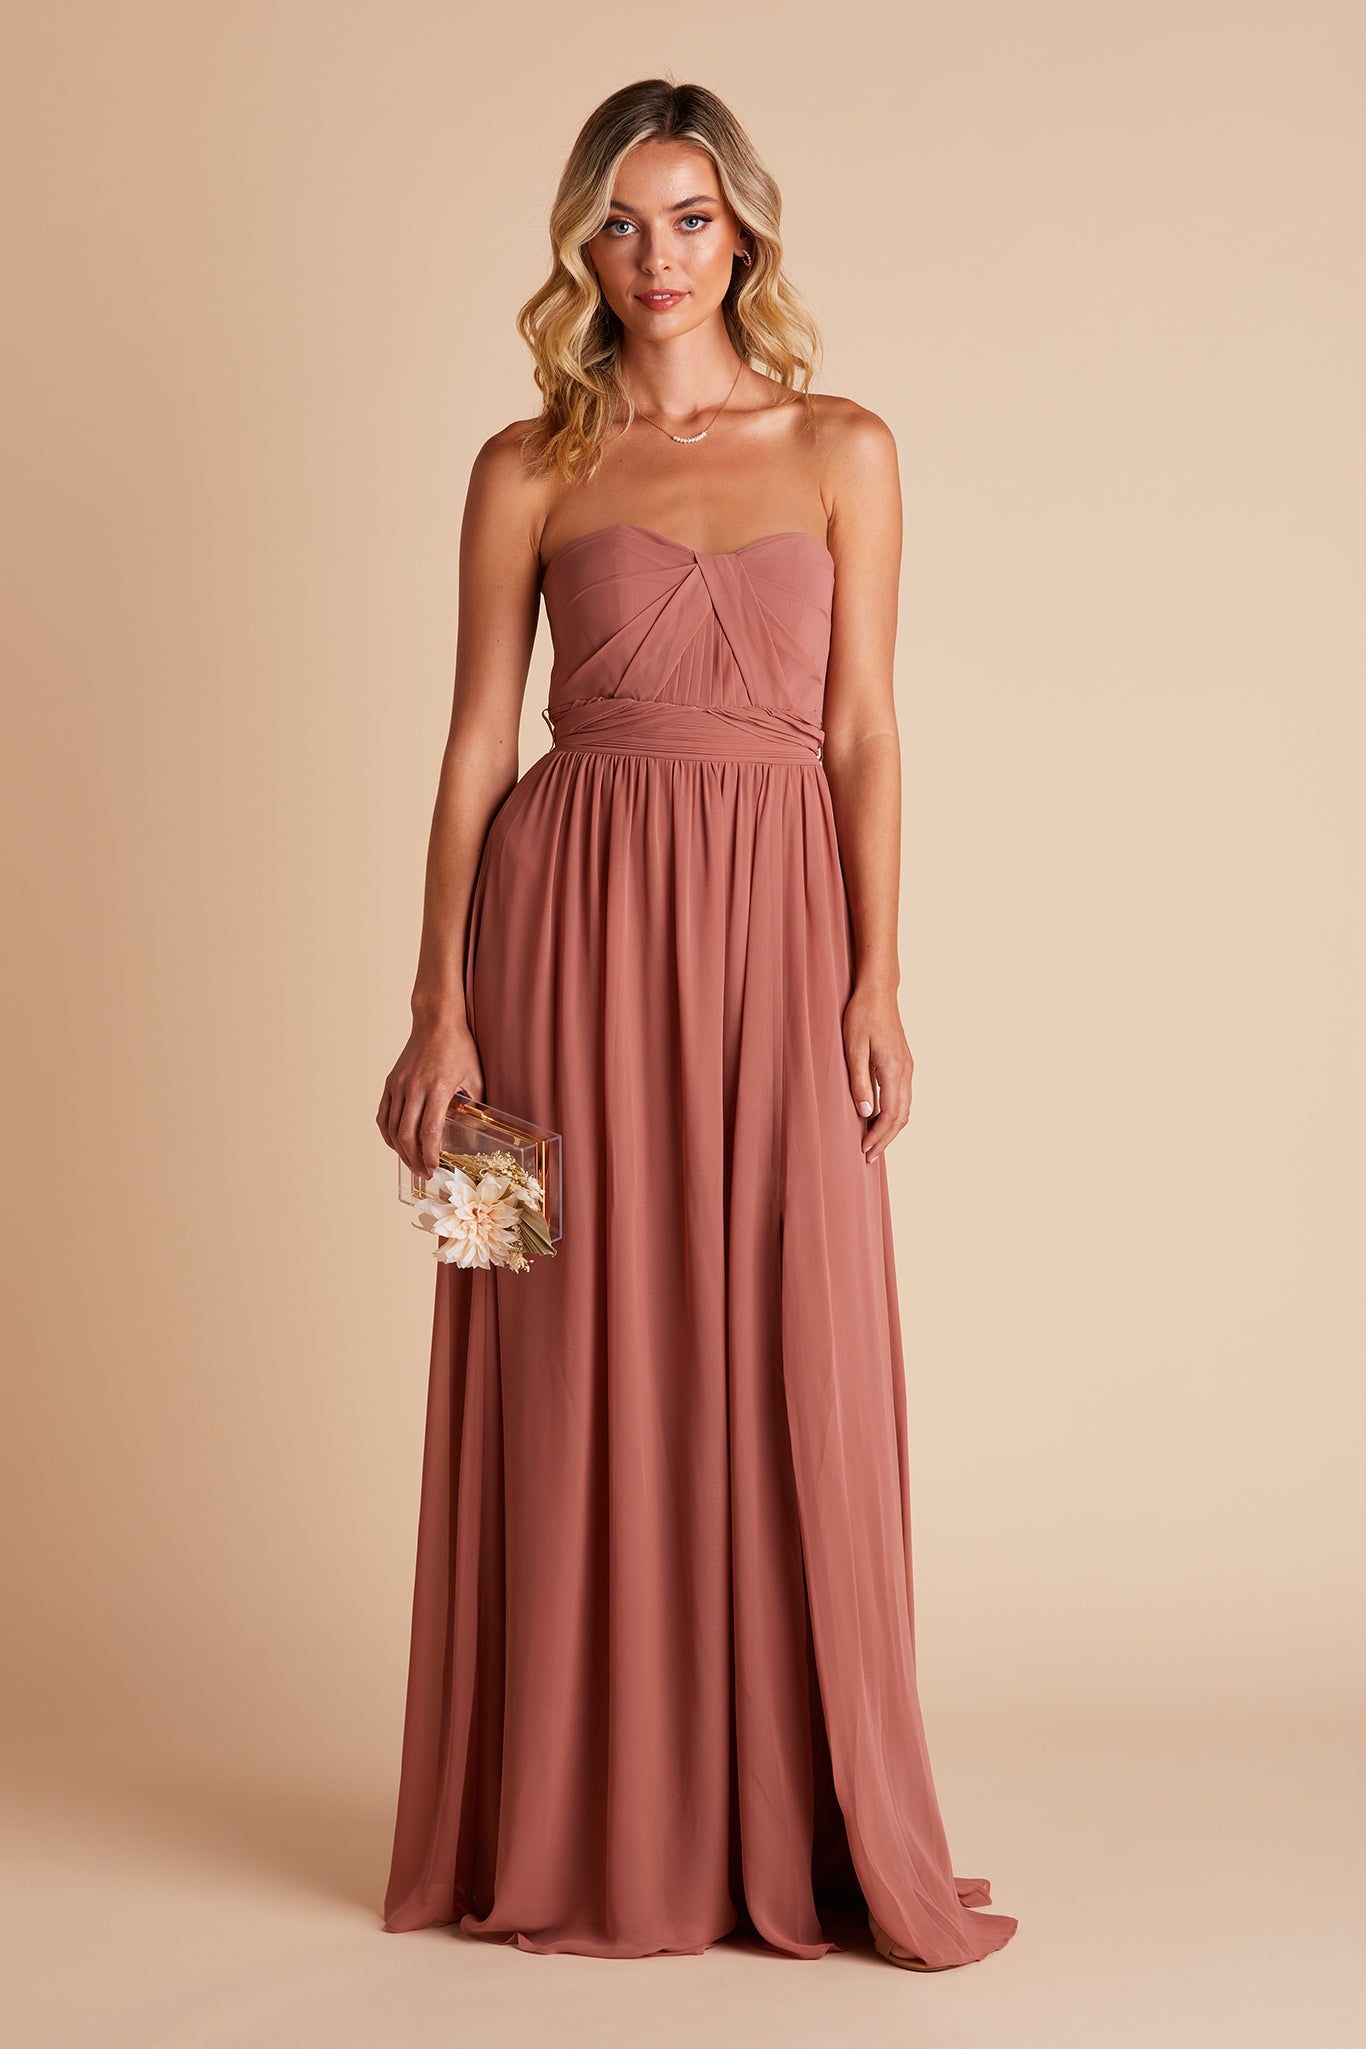 Grace convertible bridesmaid dress in desert rose by Birdy Grey, front view